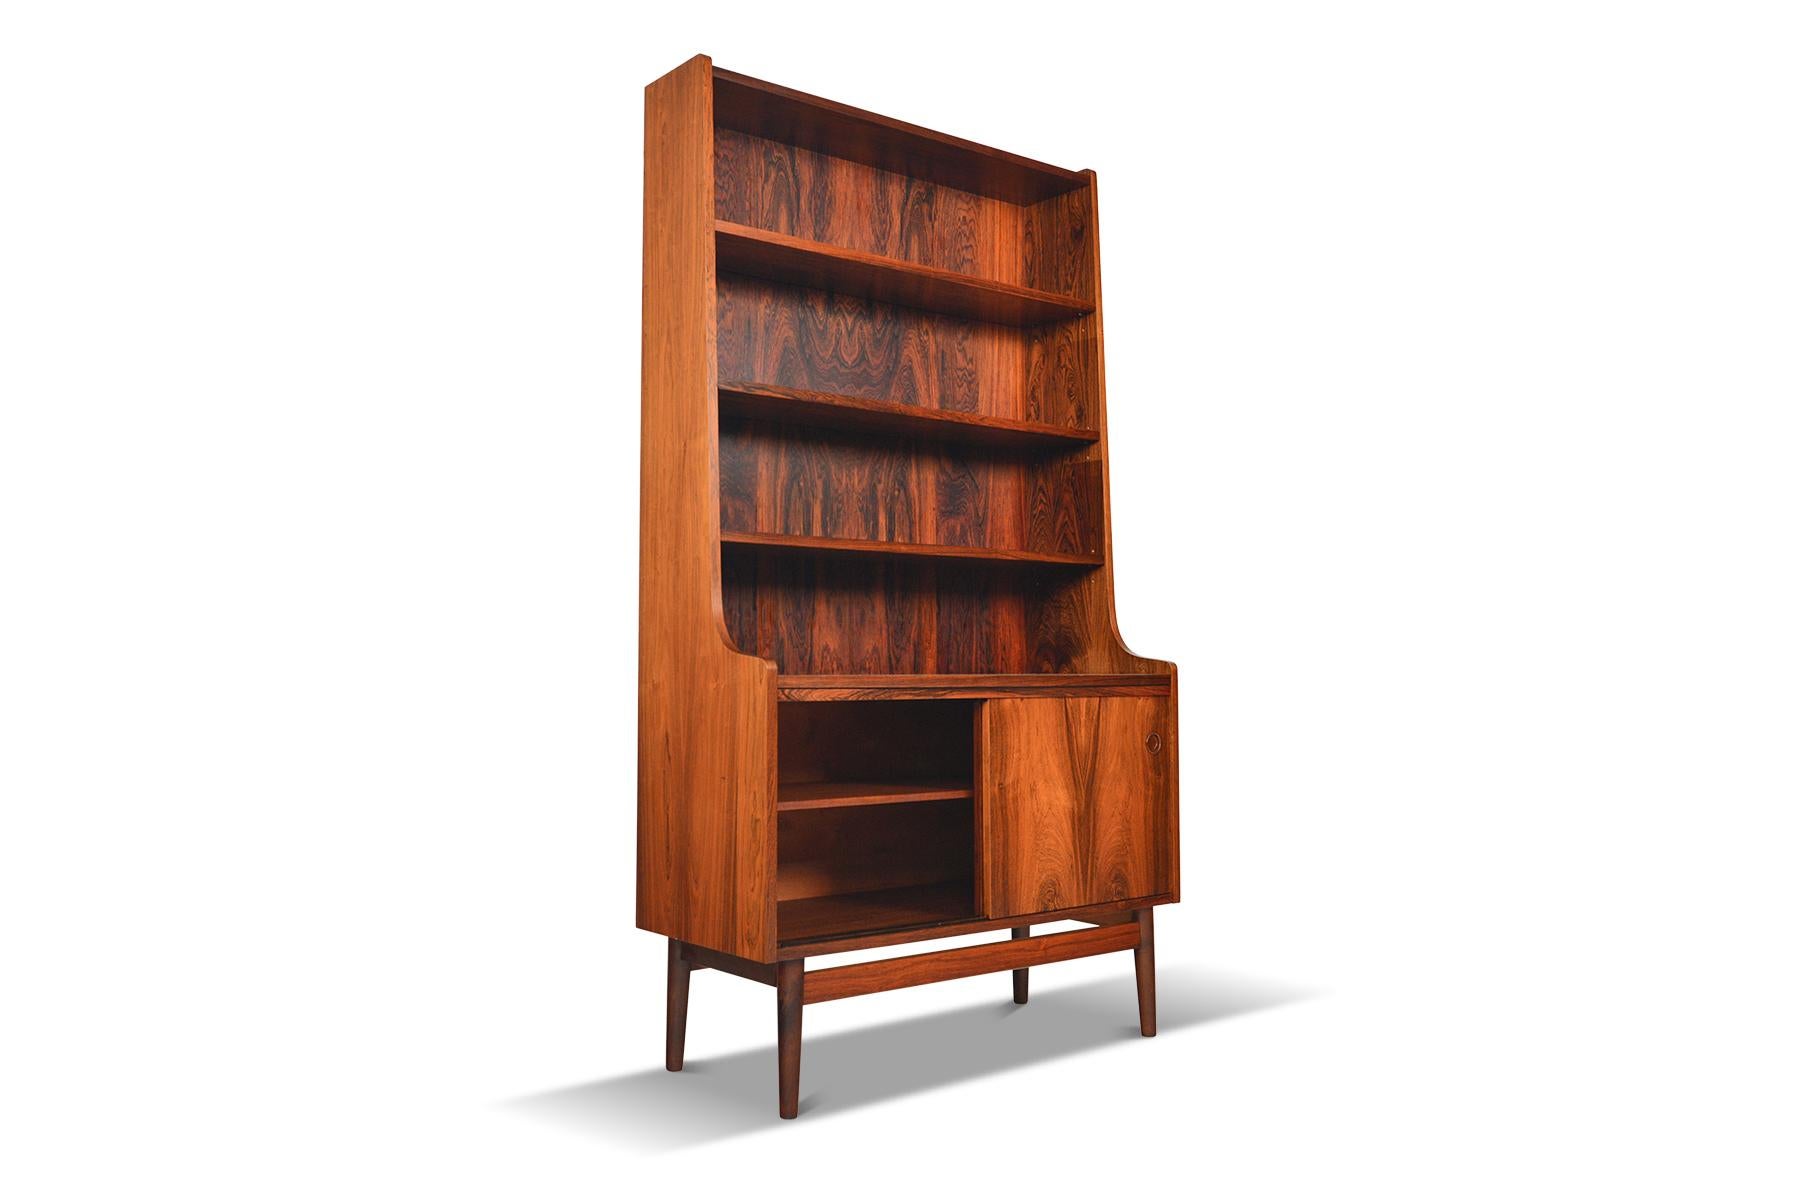 Johannes Sorth Rosewood Bookcase #1 In Excellent Condition For Sale In Berkeley, CA